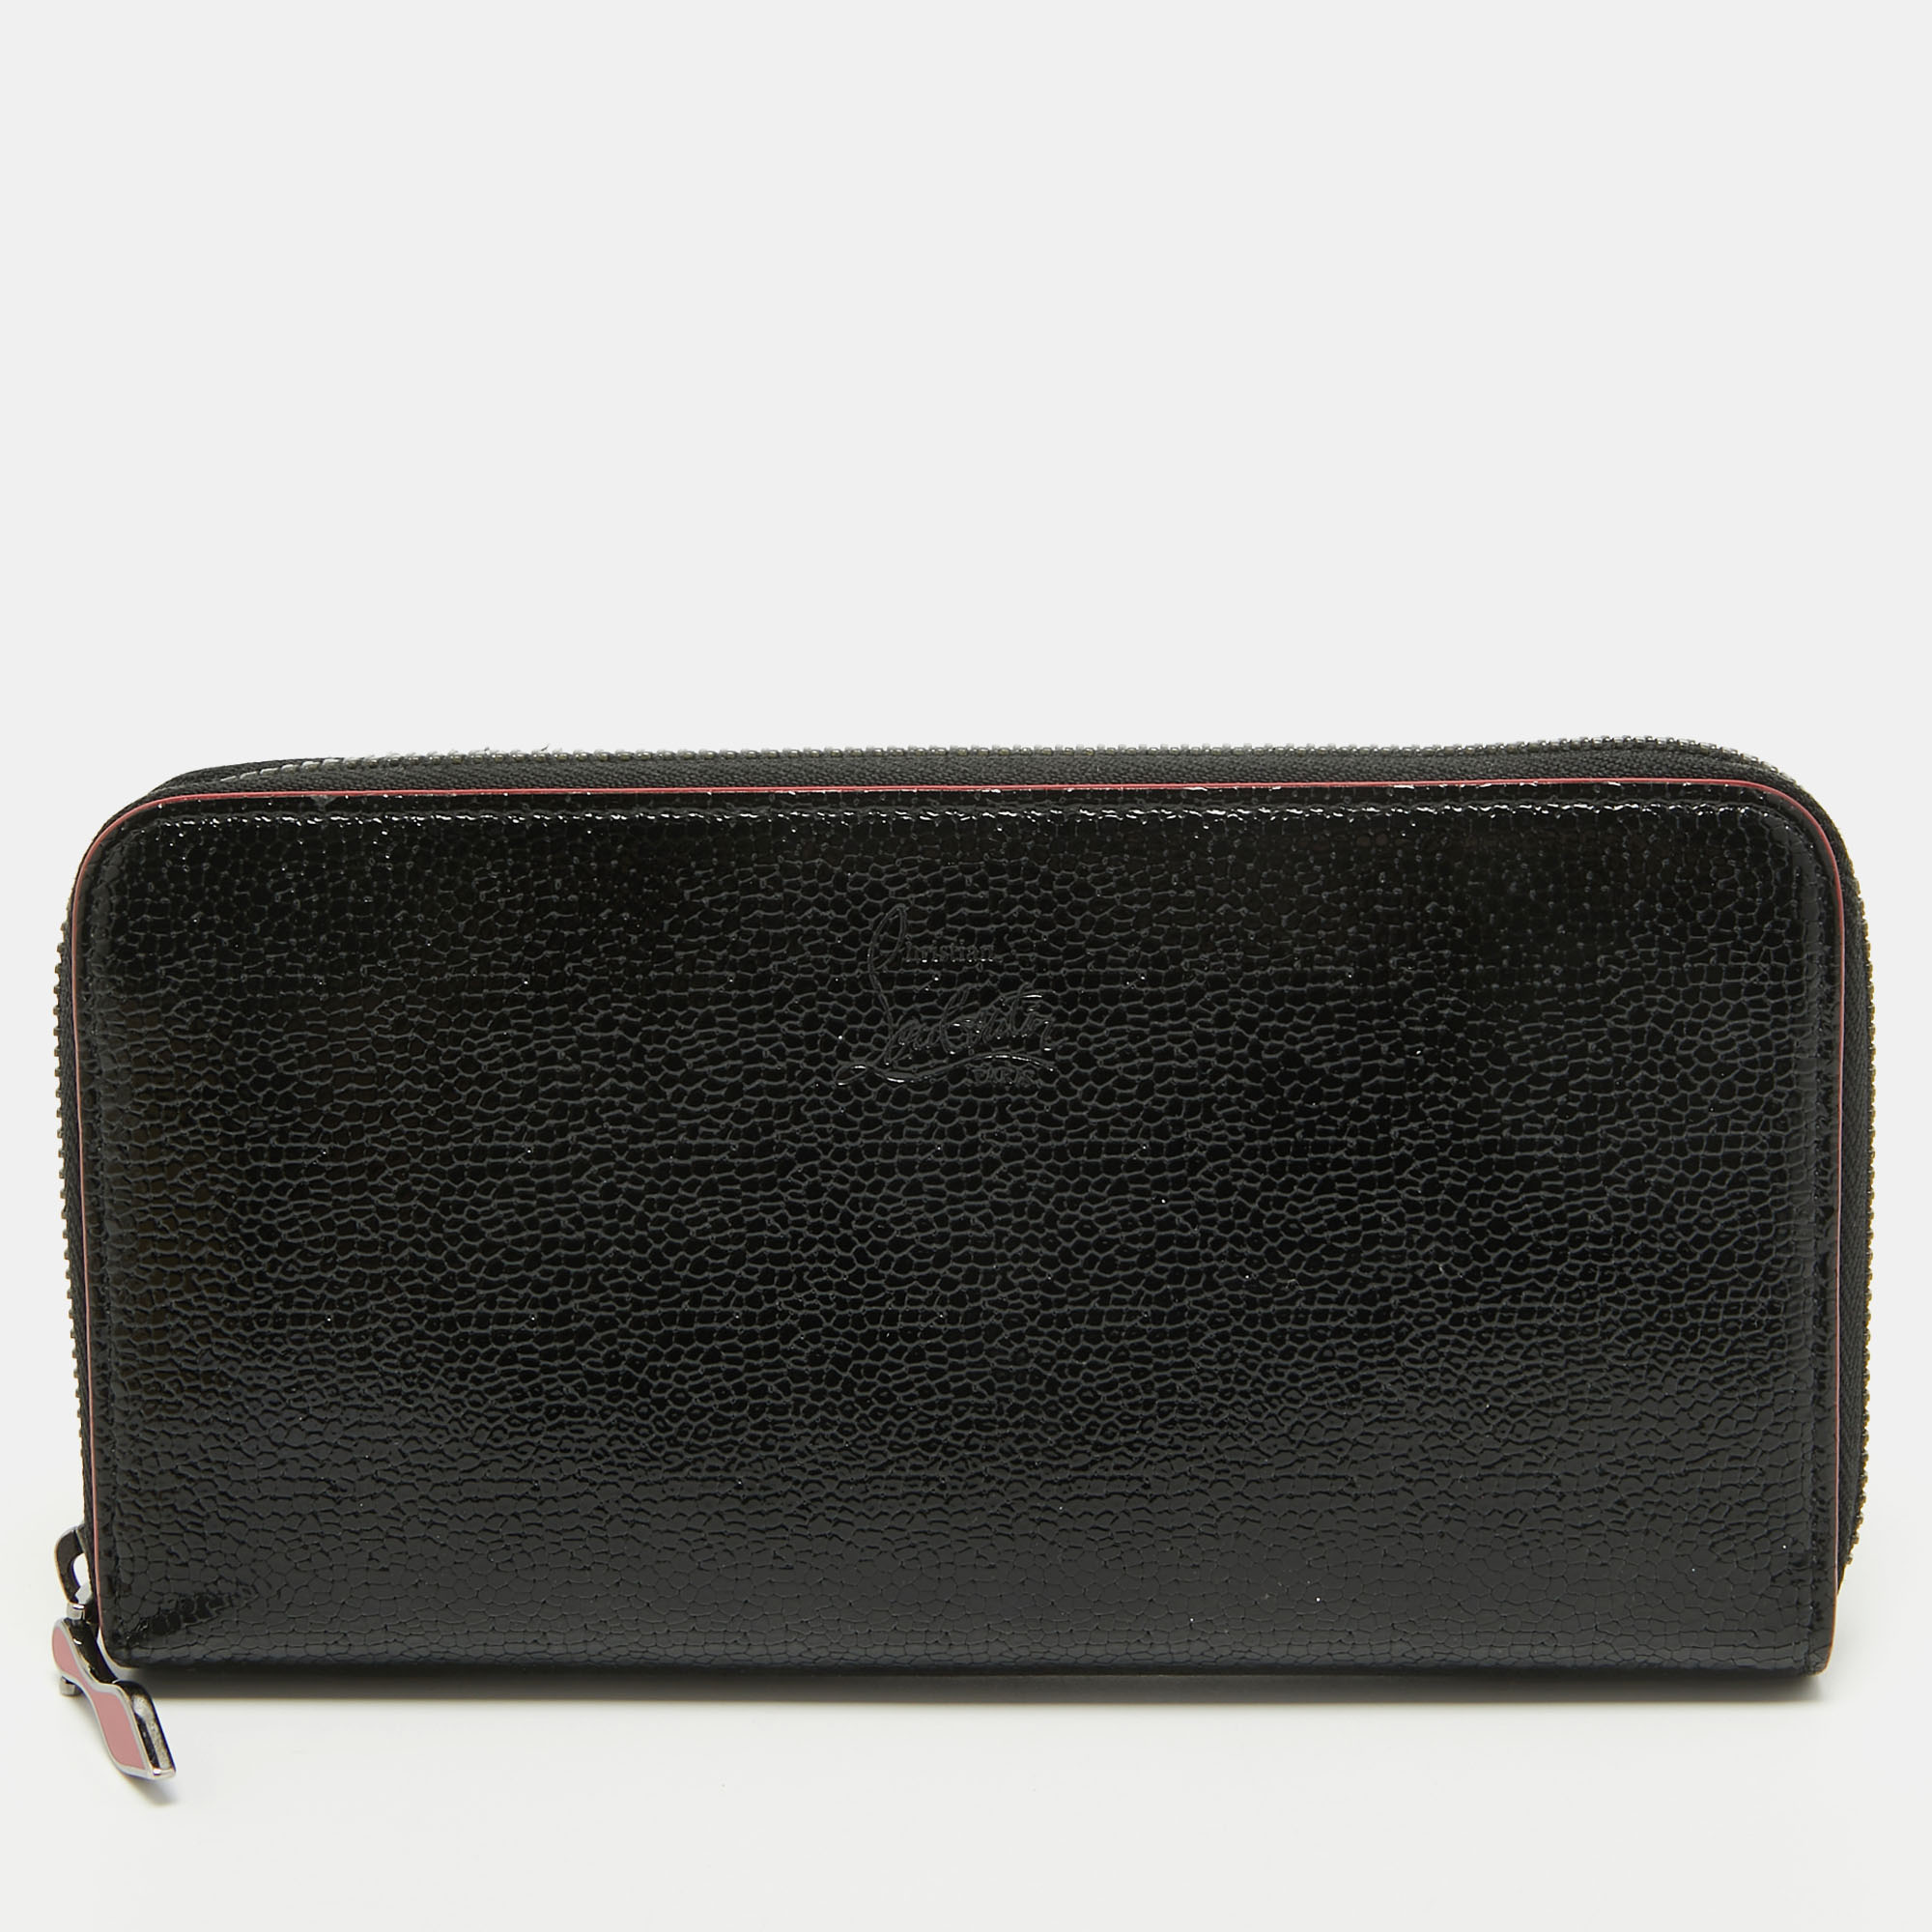 

Christian Louboutin Black Crackled Patent Leather Zip Around Continental Wallet